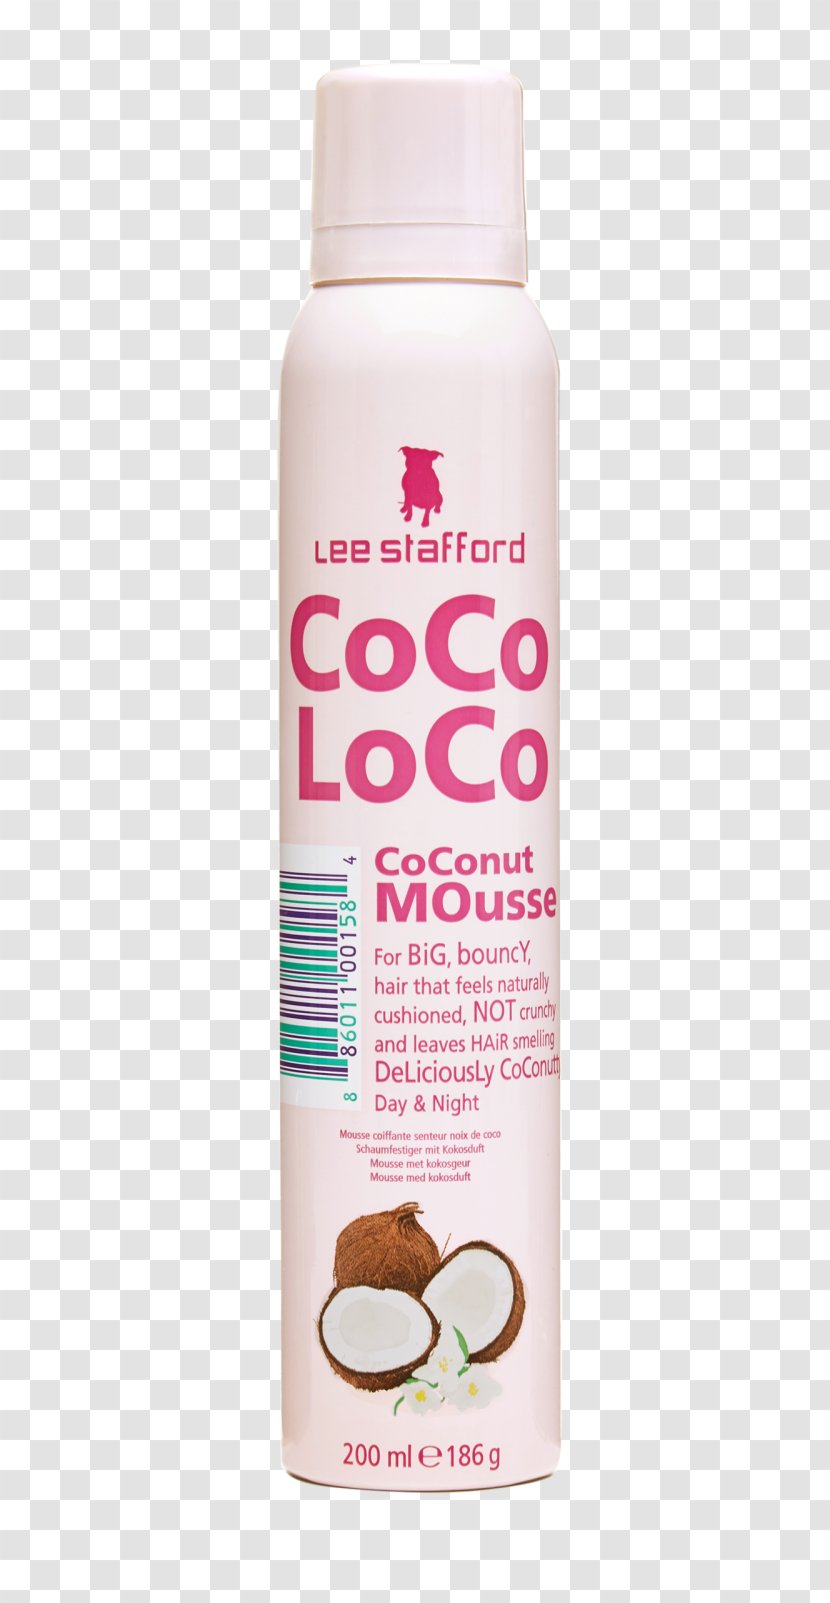 Lotion Lee Stafford Coco Loco Hair Spray Mousse Product - Coconut - Vita 16 9 Transparent PNG